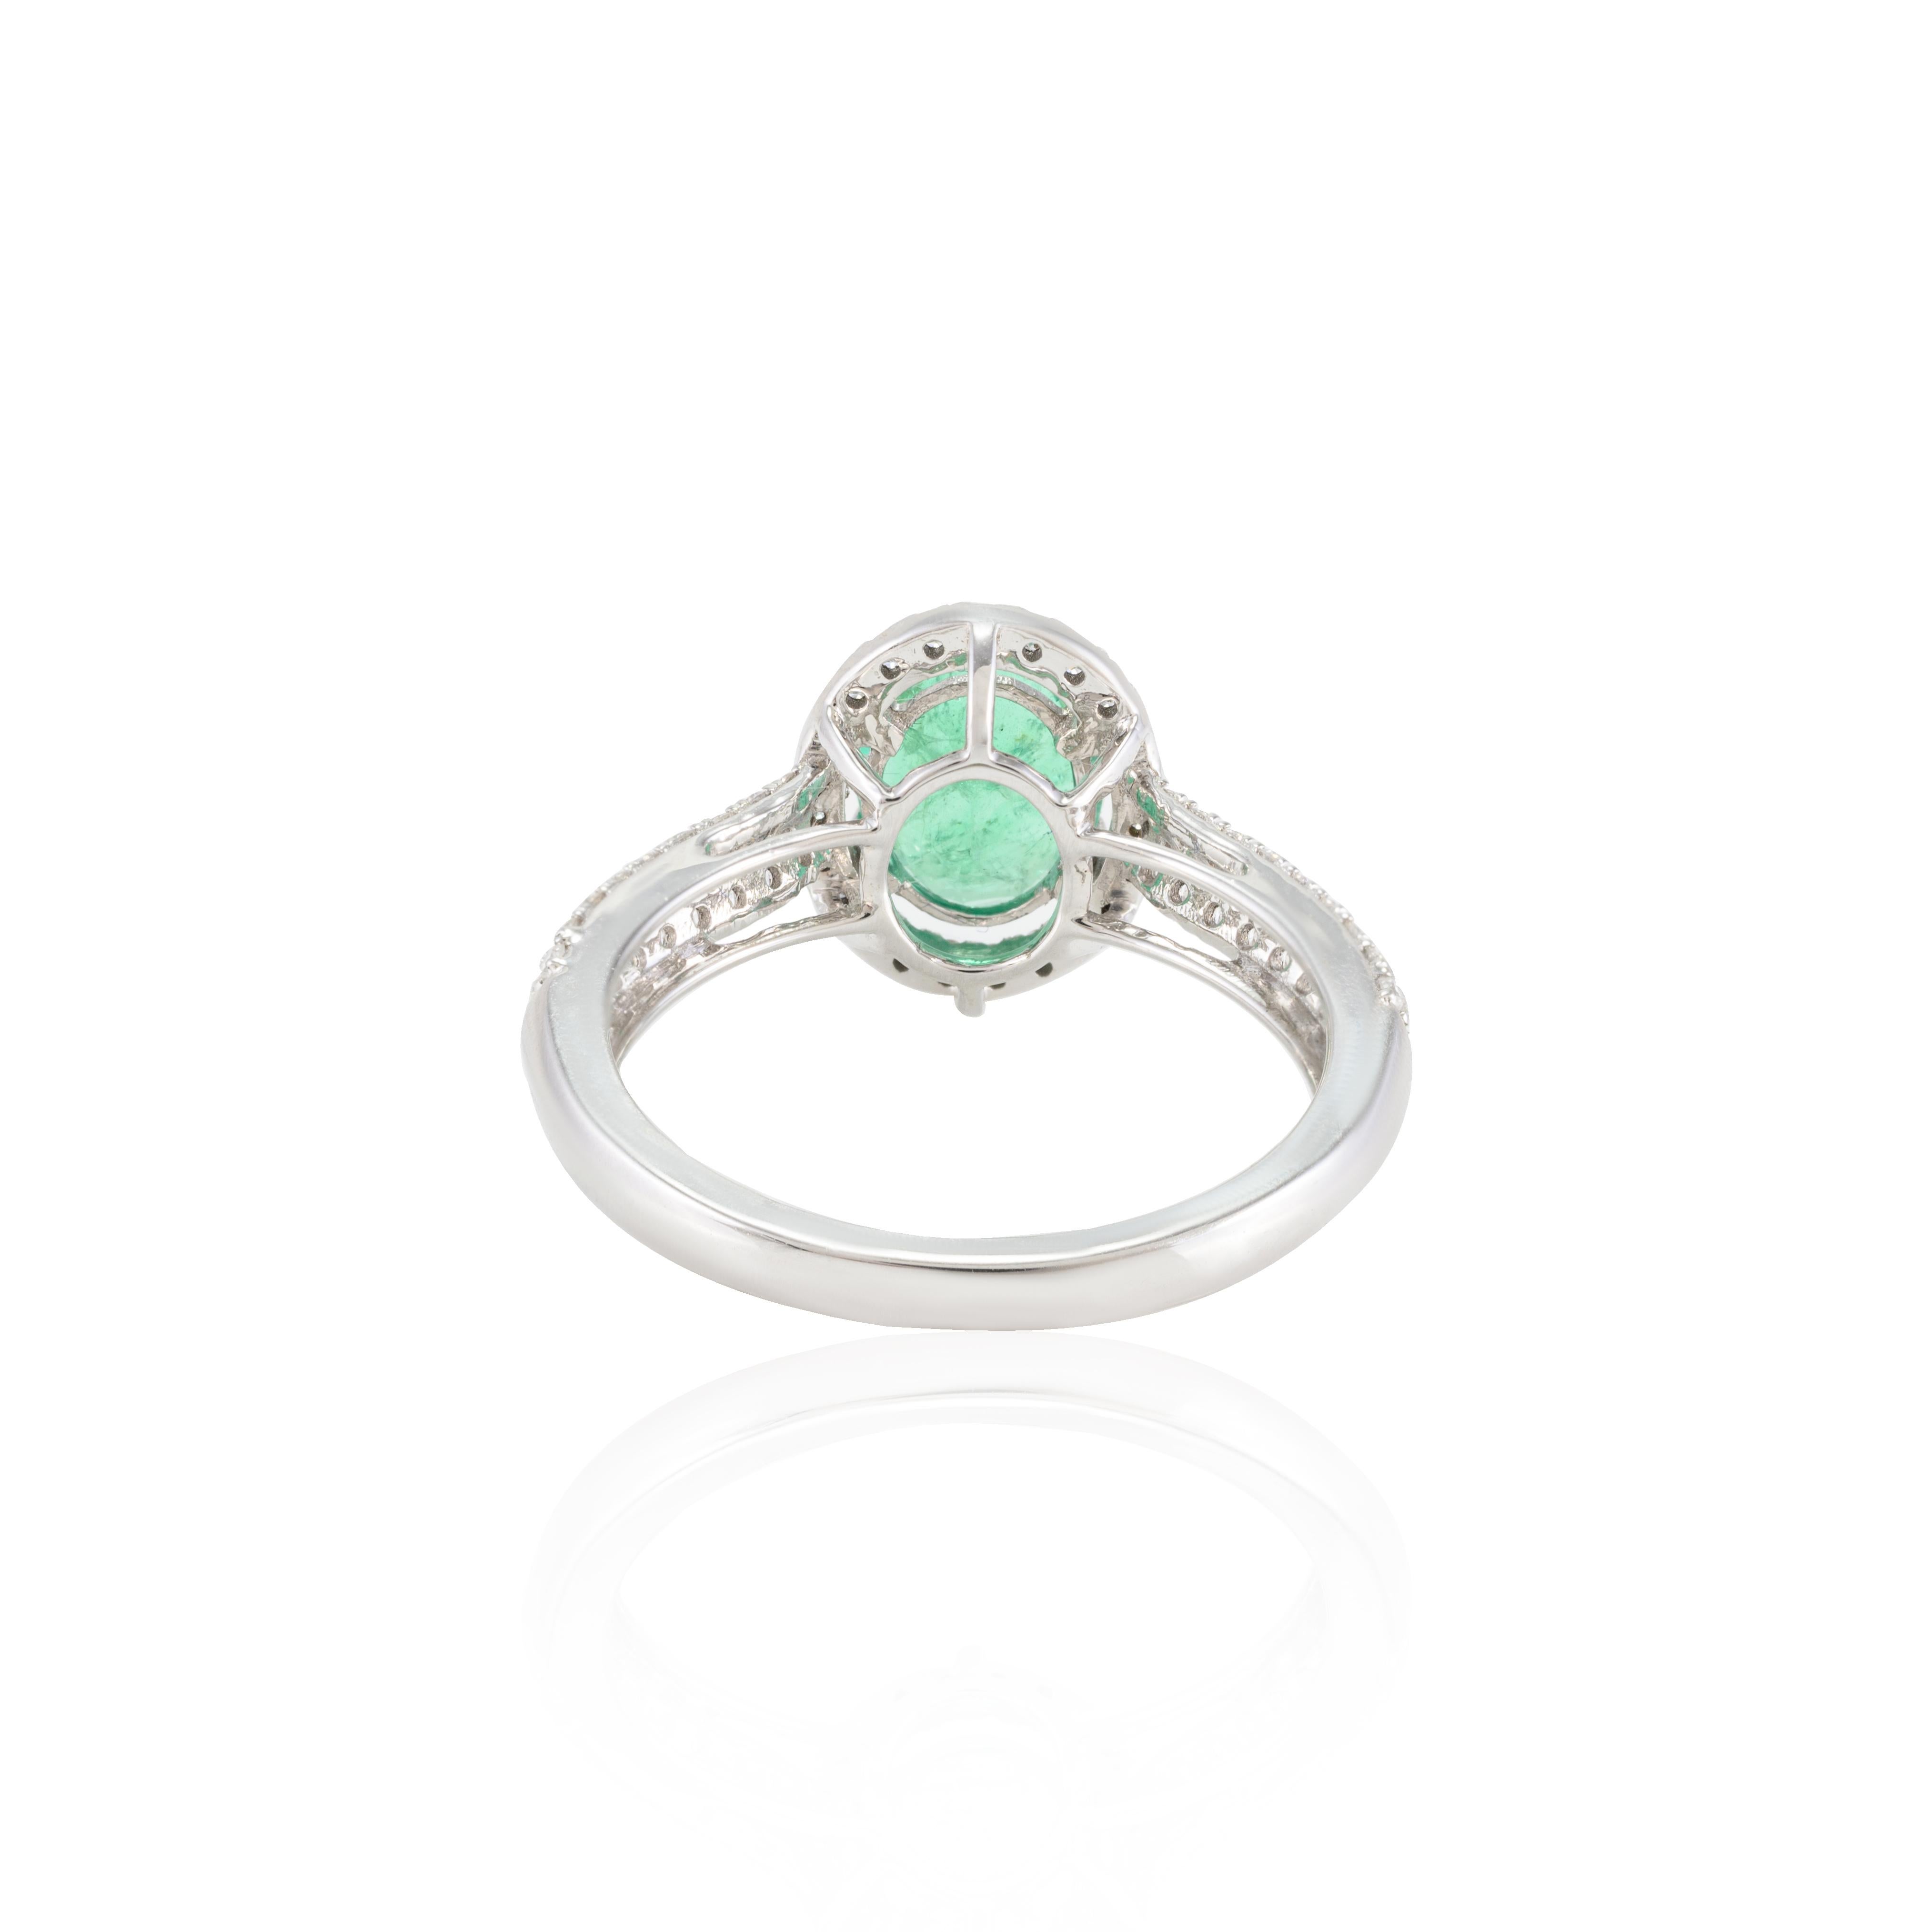 For Sale:  18k Solid White Gold Glamorous Emerald Halo Diamond Engagement Ring for Her 6